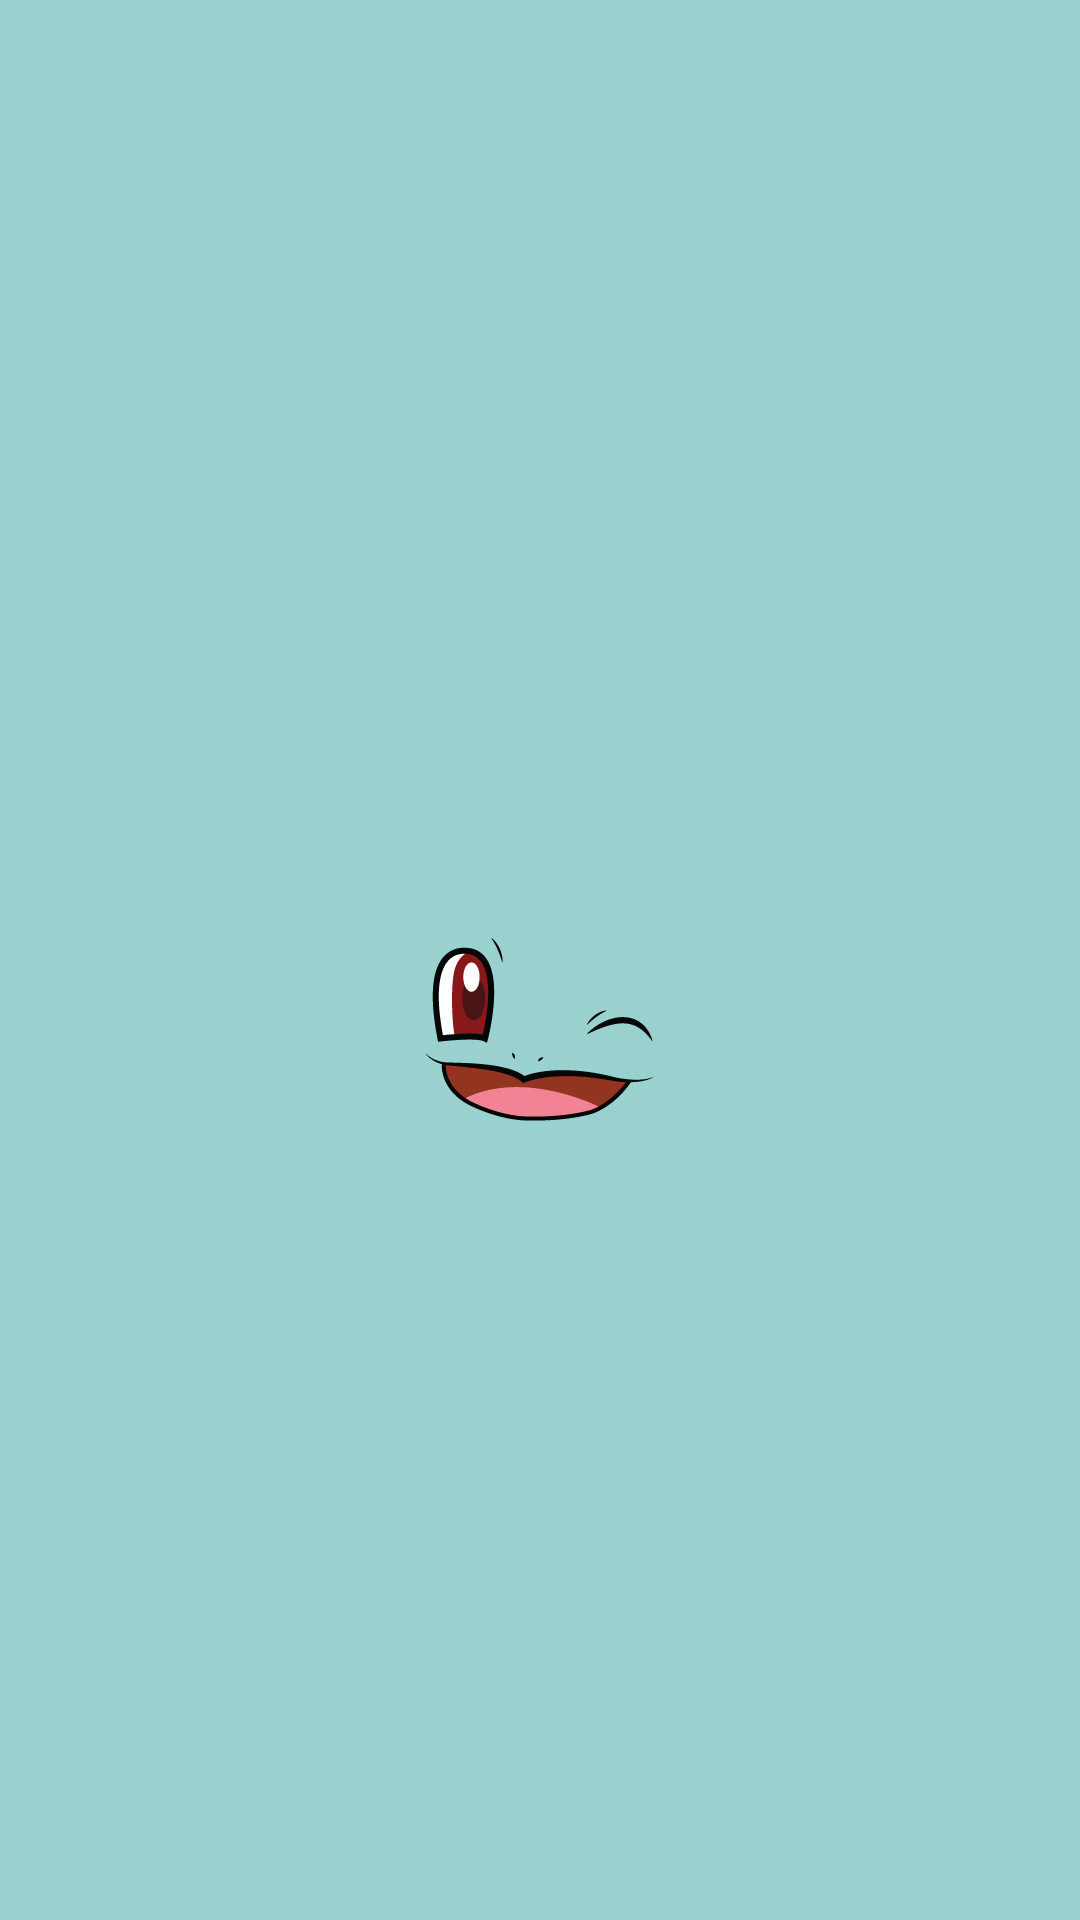 1080x1920 Squirtle Pokemon iPhone 6+ HD Wallpaper - http://freebestpicture.com/